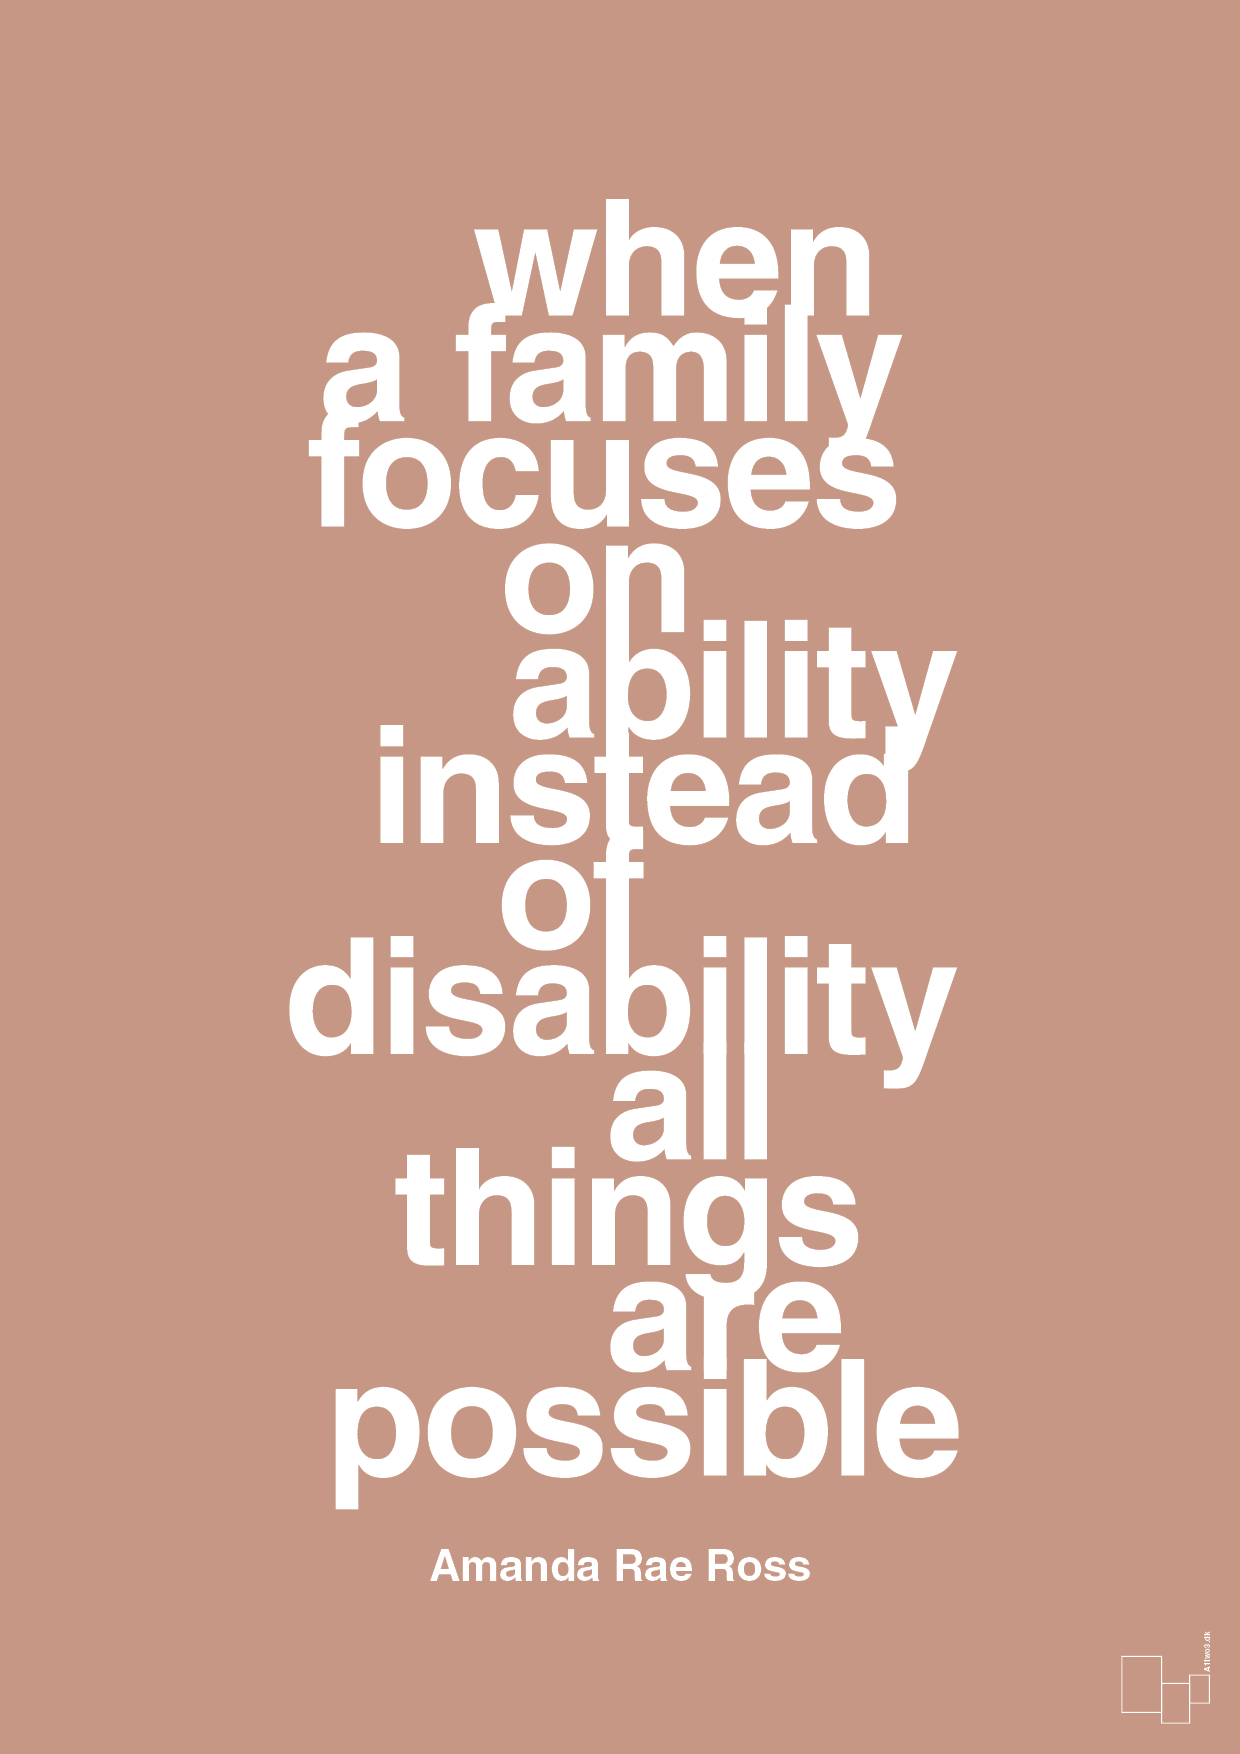 when a family focuses on ability instead of disability all things are possible - Plakat med Samfund i Powder